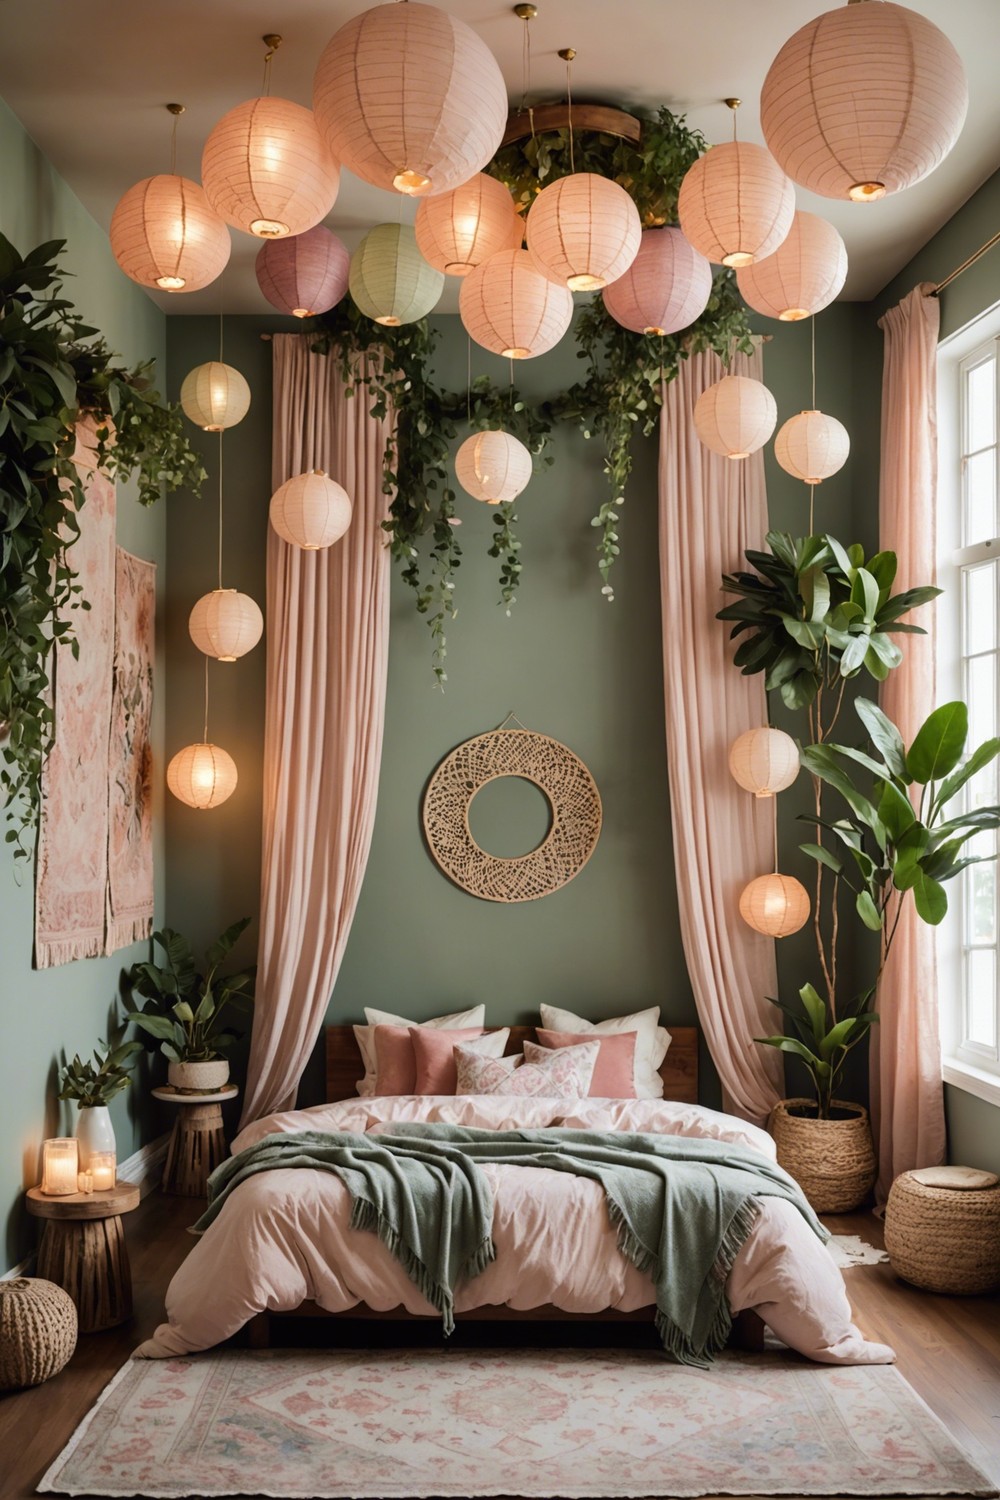 Relaxed and Refined: Hanging Paper Lanterns in Soft Hues